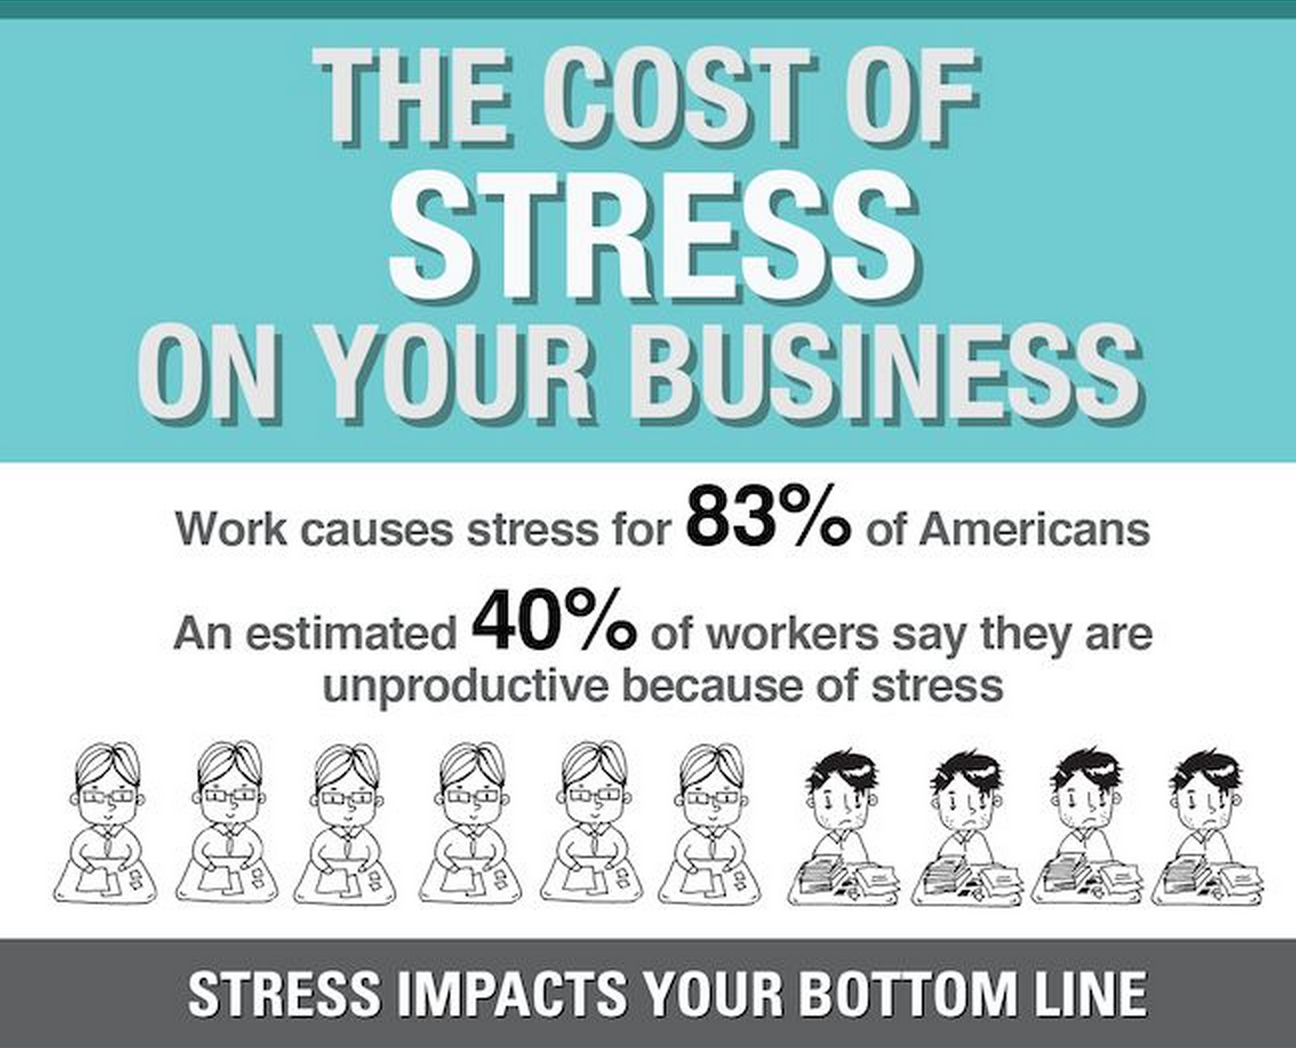 The Cost of Stress on Your Business